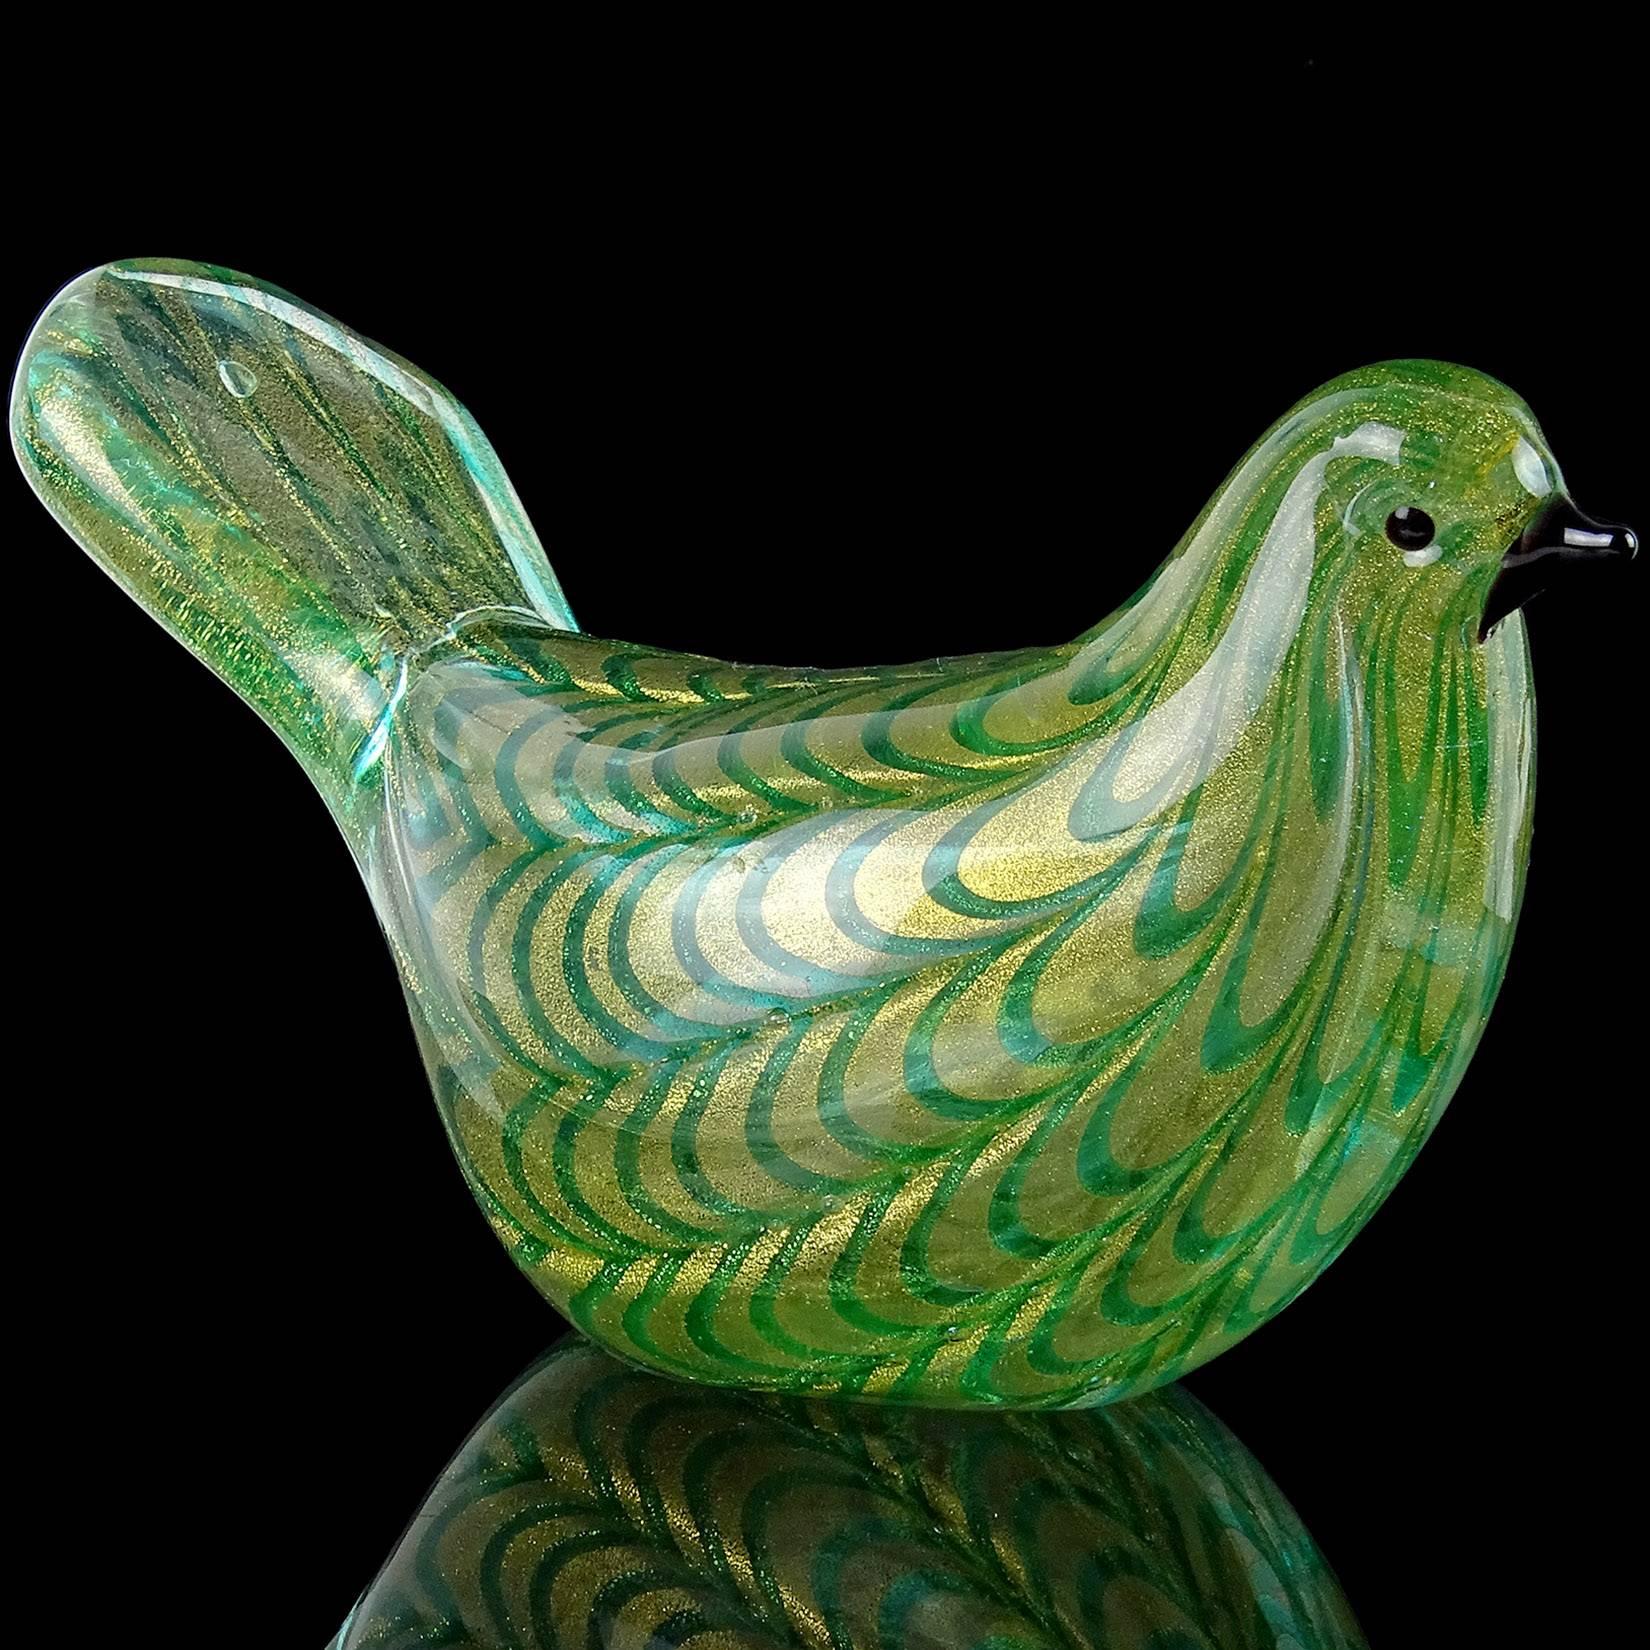 Beautiful Murano handblown green spiderweb/pulled feather design with gold flecks Italian art glass bird figurine/paperweight. Documented to the Barovier e Toso company. Measures 6 3/4” long x 3 3/4” tall x 3” wide.